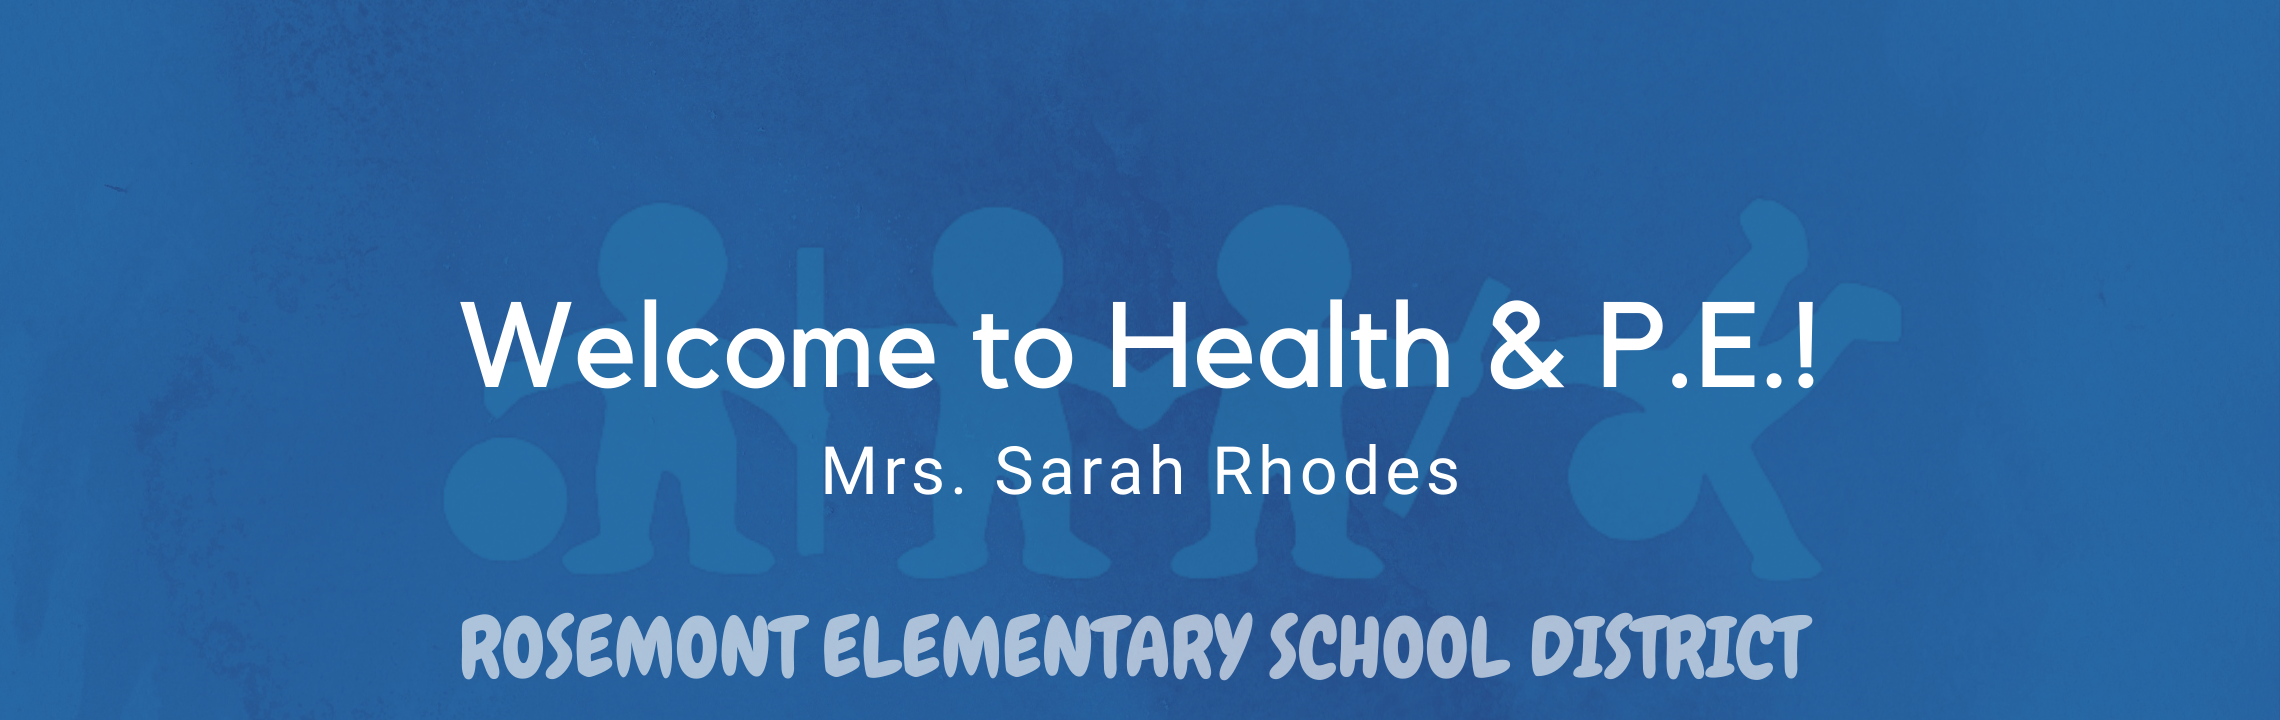 Welcome to Health & P.E., Mrs. Sarah Rhodes, Rosemont Elementary Schools 